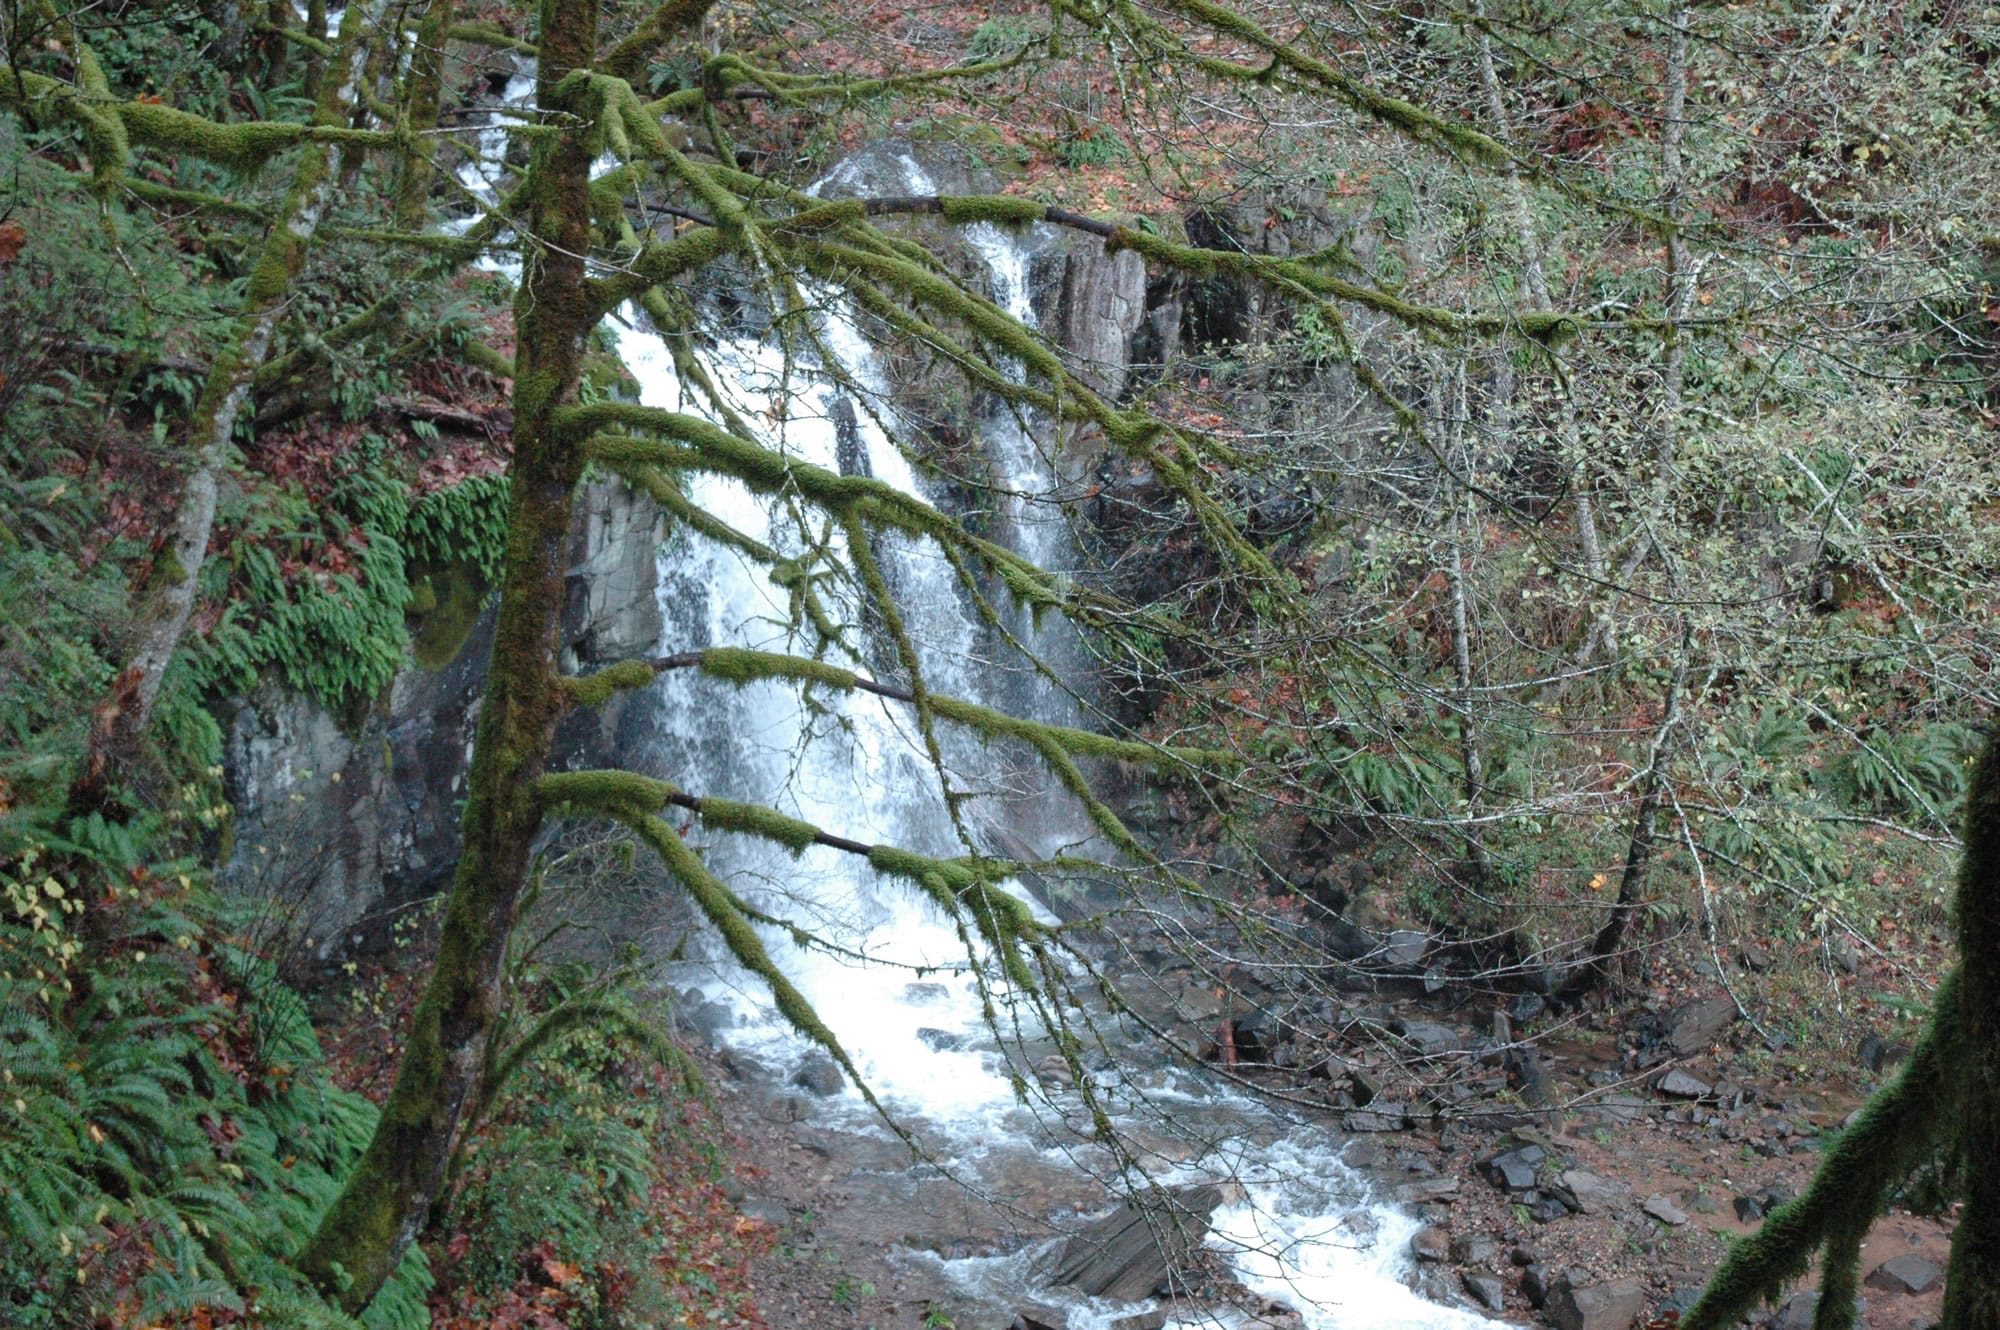 It is less than a half-mile walk to Marble Creek Falls, just upstream from Merwin Reservoir.